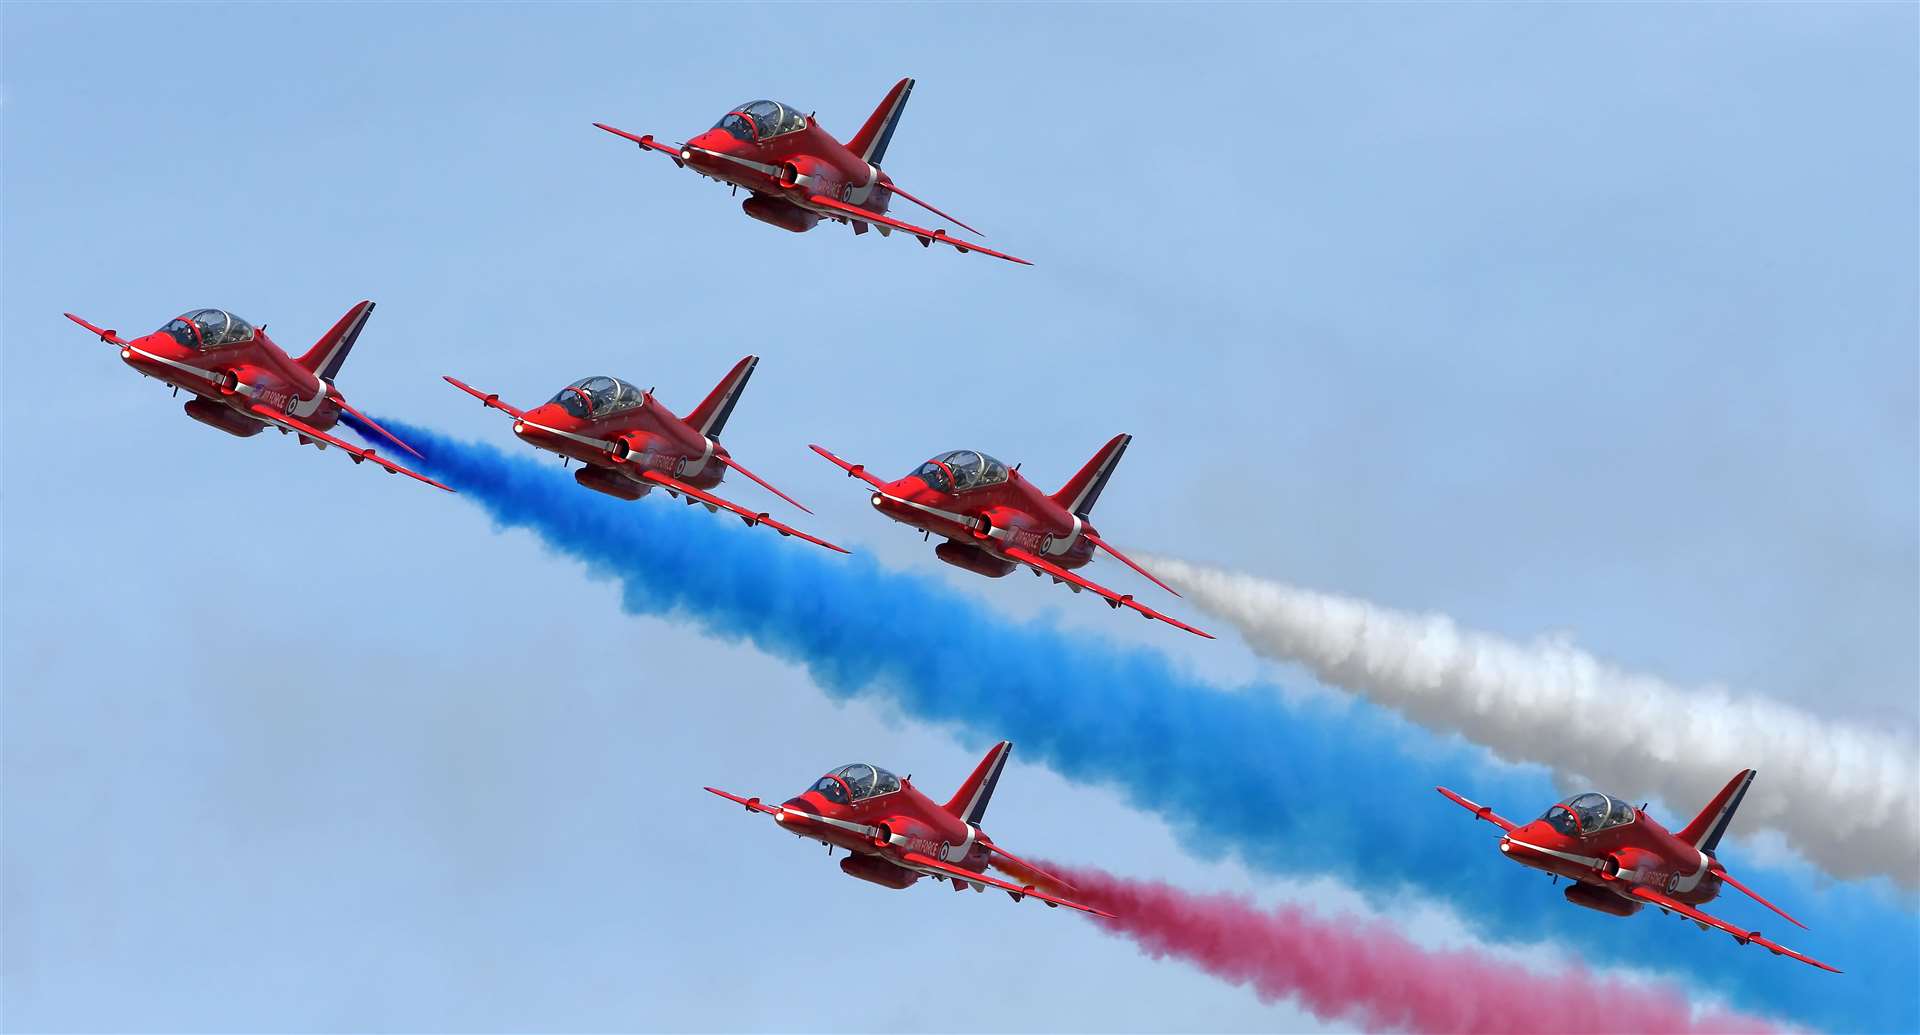 The Red Arrows will be flying over Kent